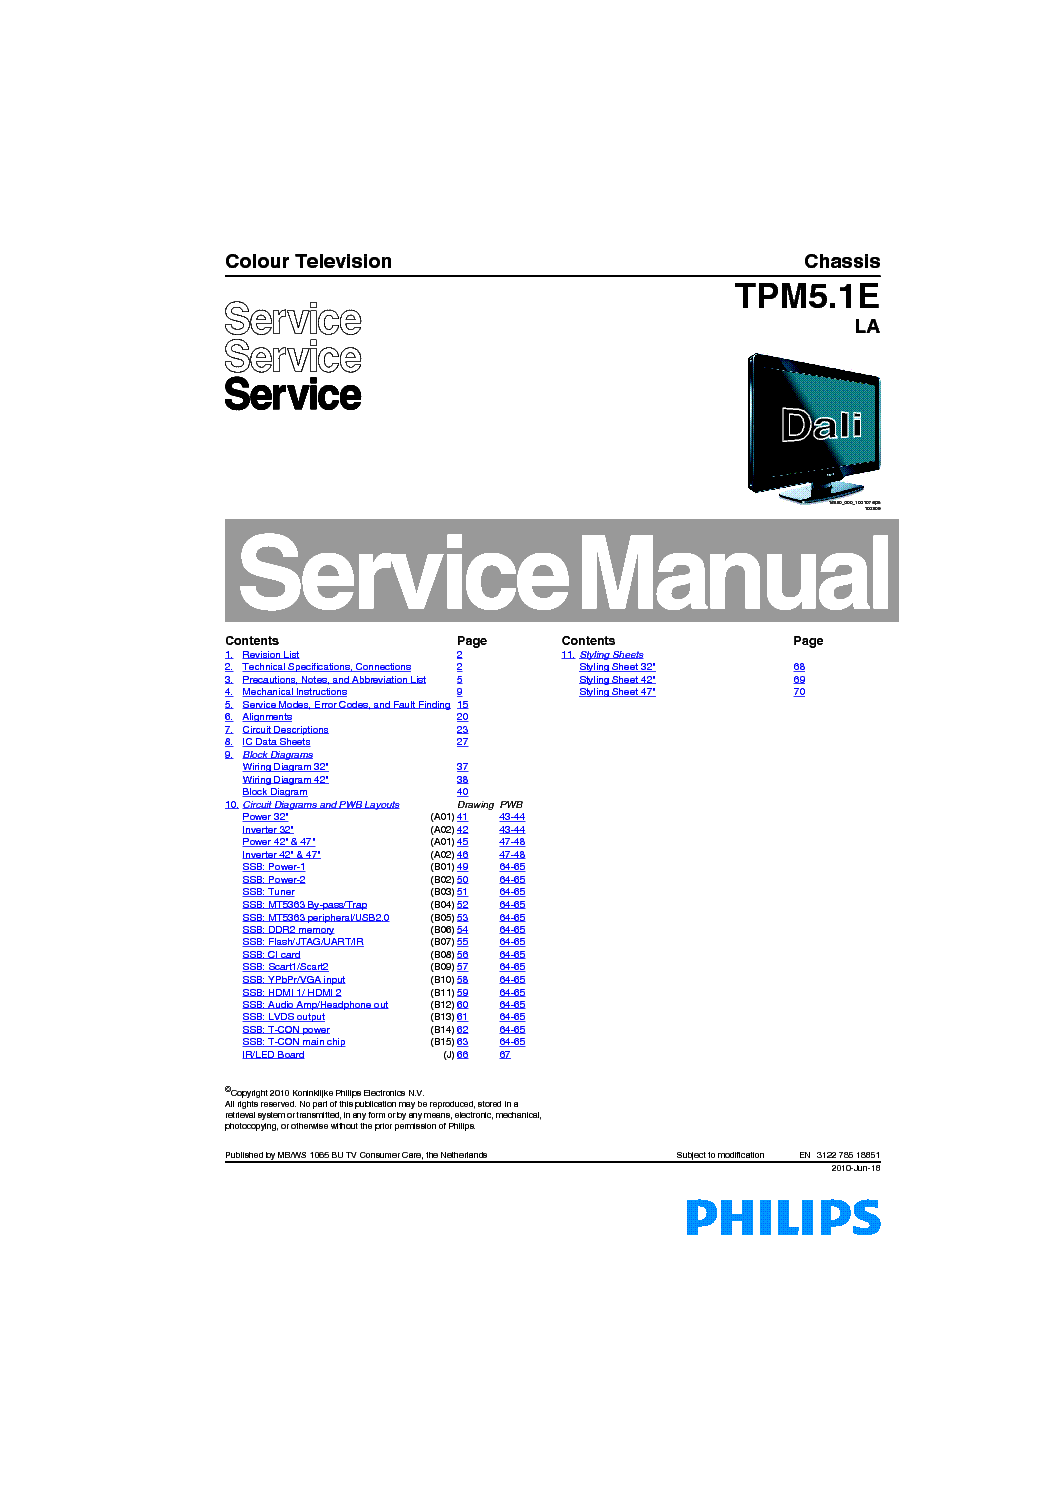 PHILIPS CHASSIS TPM5.1ELA service manual (1st page)